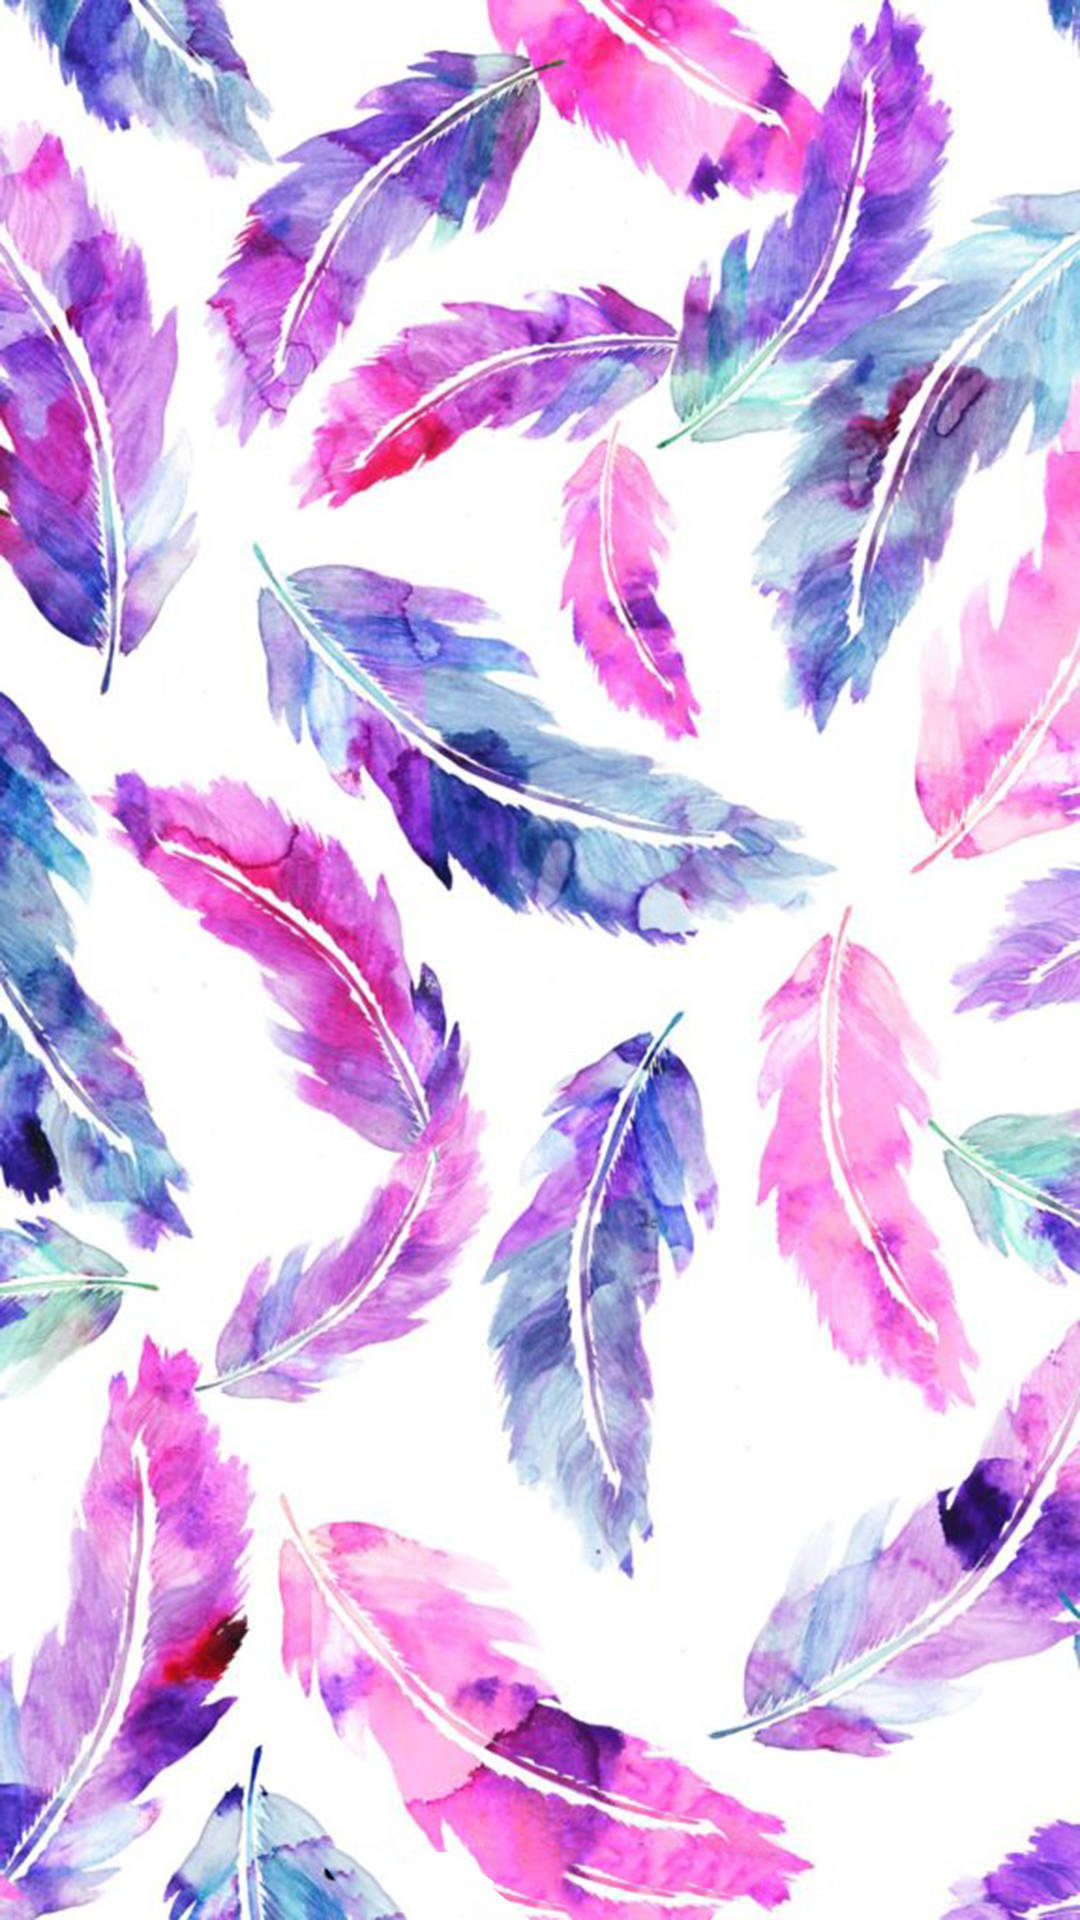 Instagram Story Watercolor Feathers Pattern Background